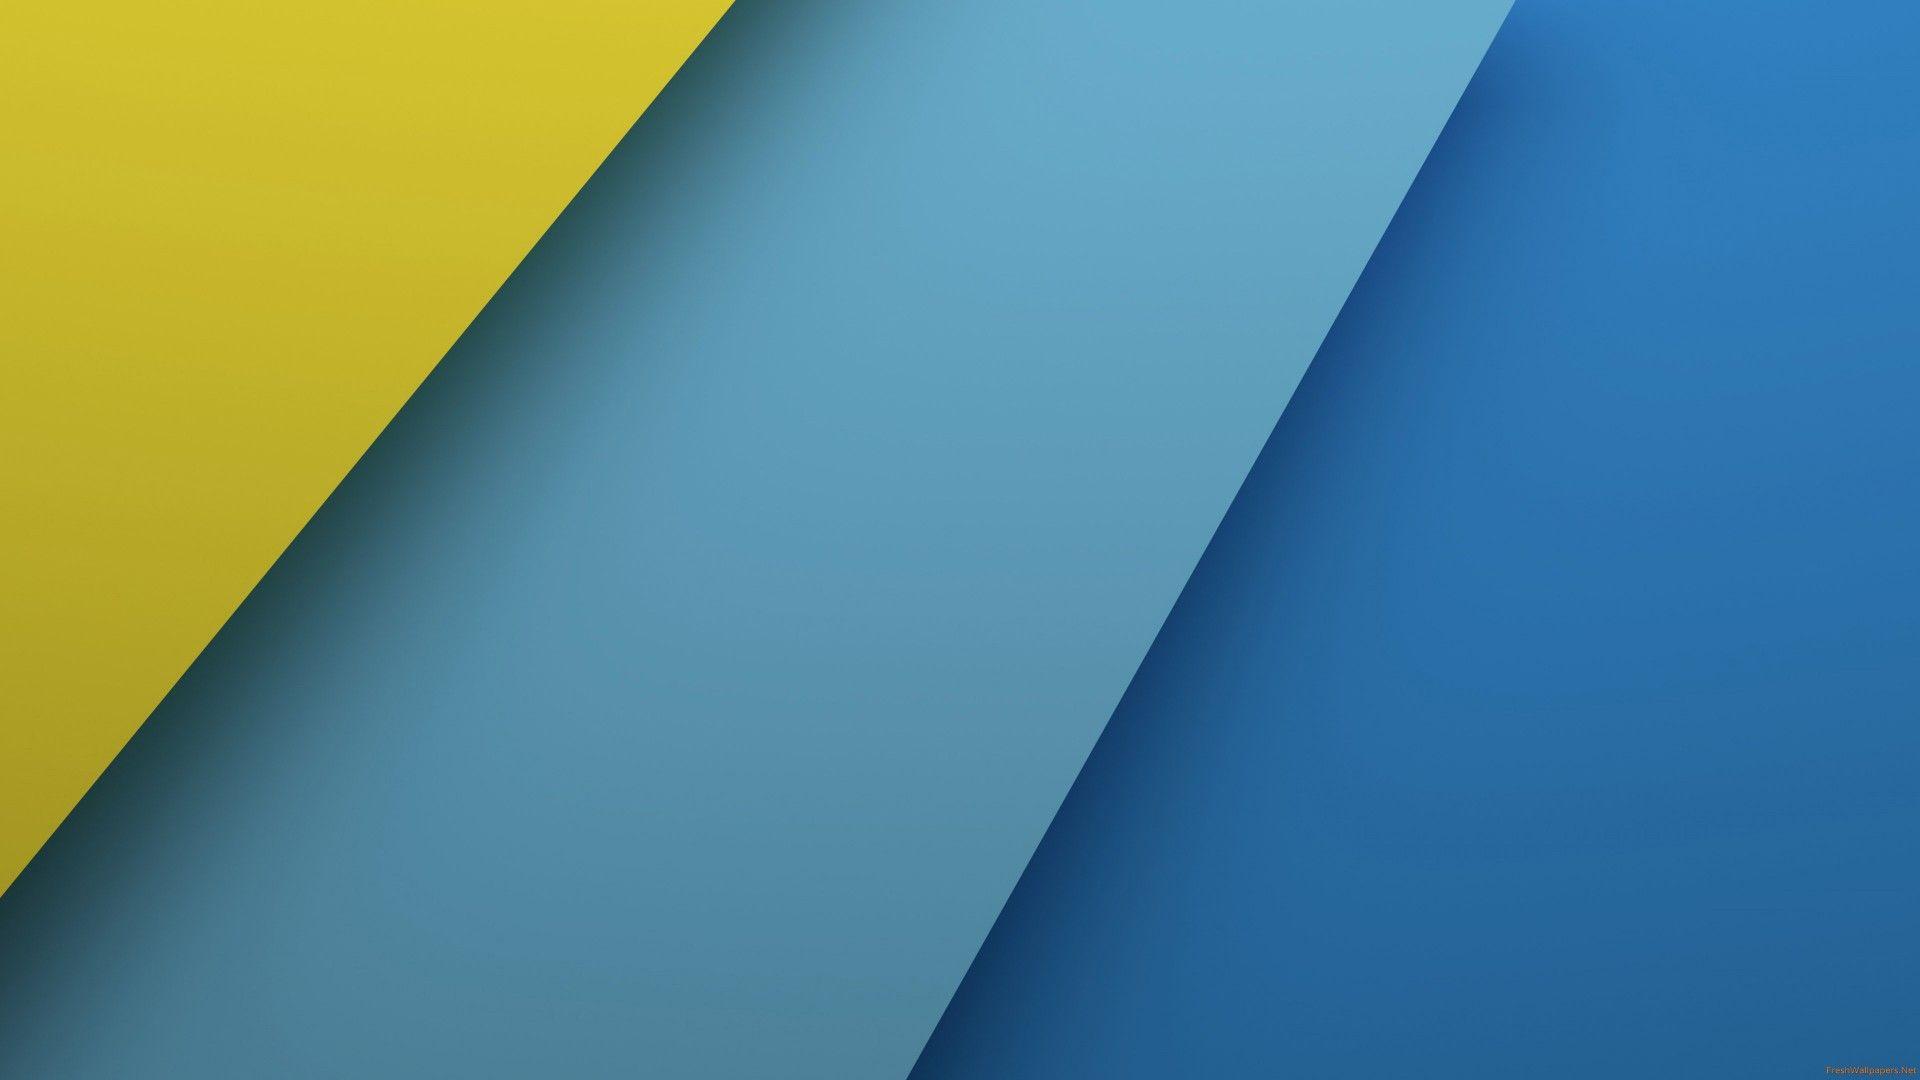 Blue and Yellow Ultra HD wallpaper. Freshwallpaper. Download